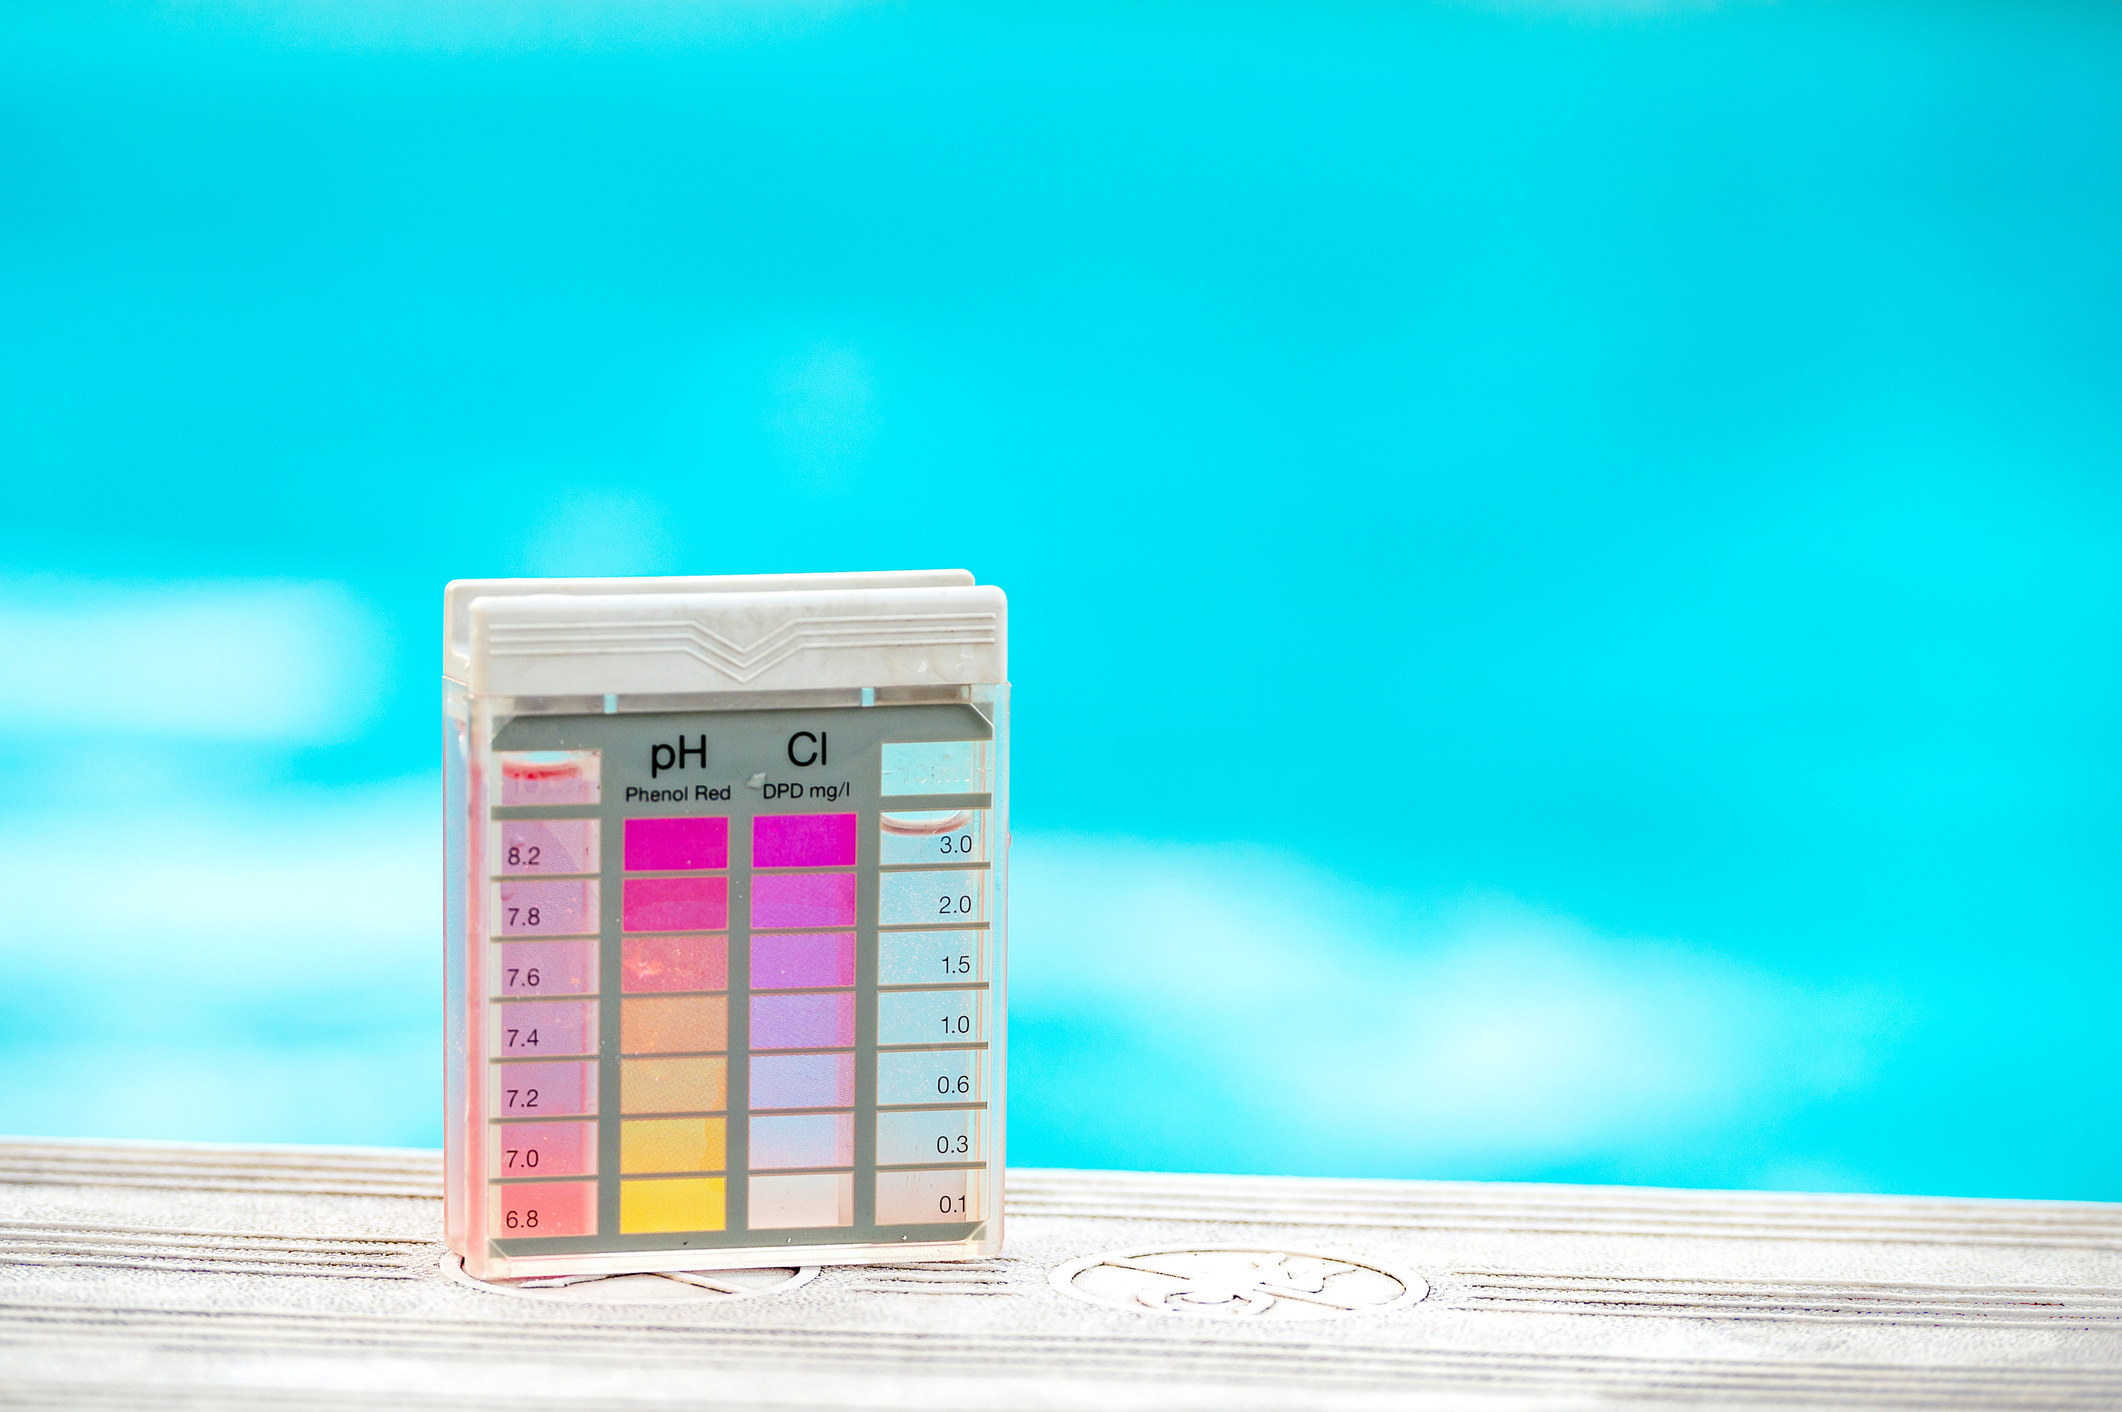 A stock image photo of an alkaline testing system sitting by a pool of water